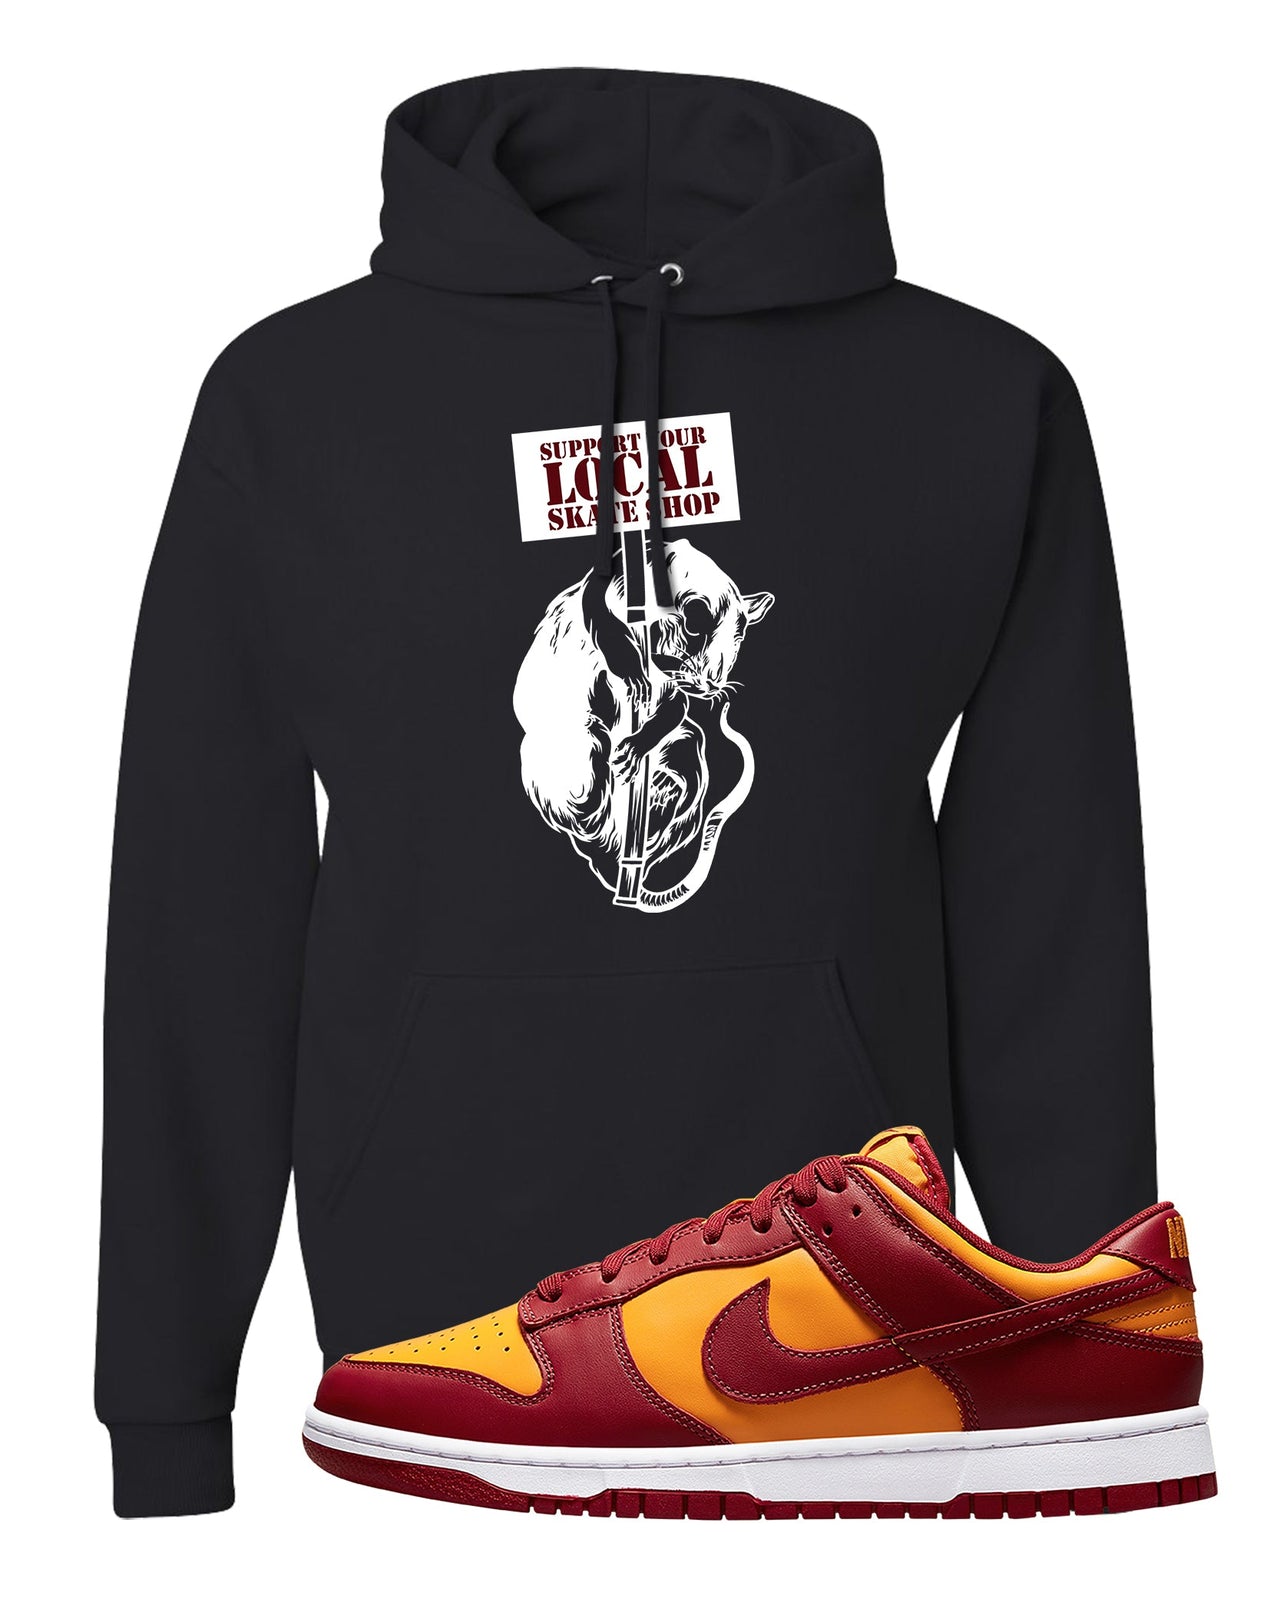 Midas Gold Low Dunks Hoodie | Support Your Local Skate Shop, Black